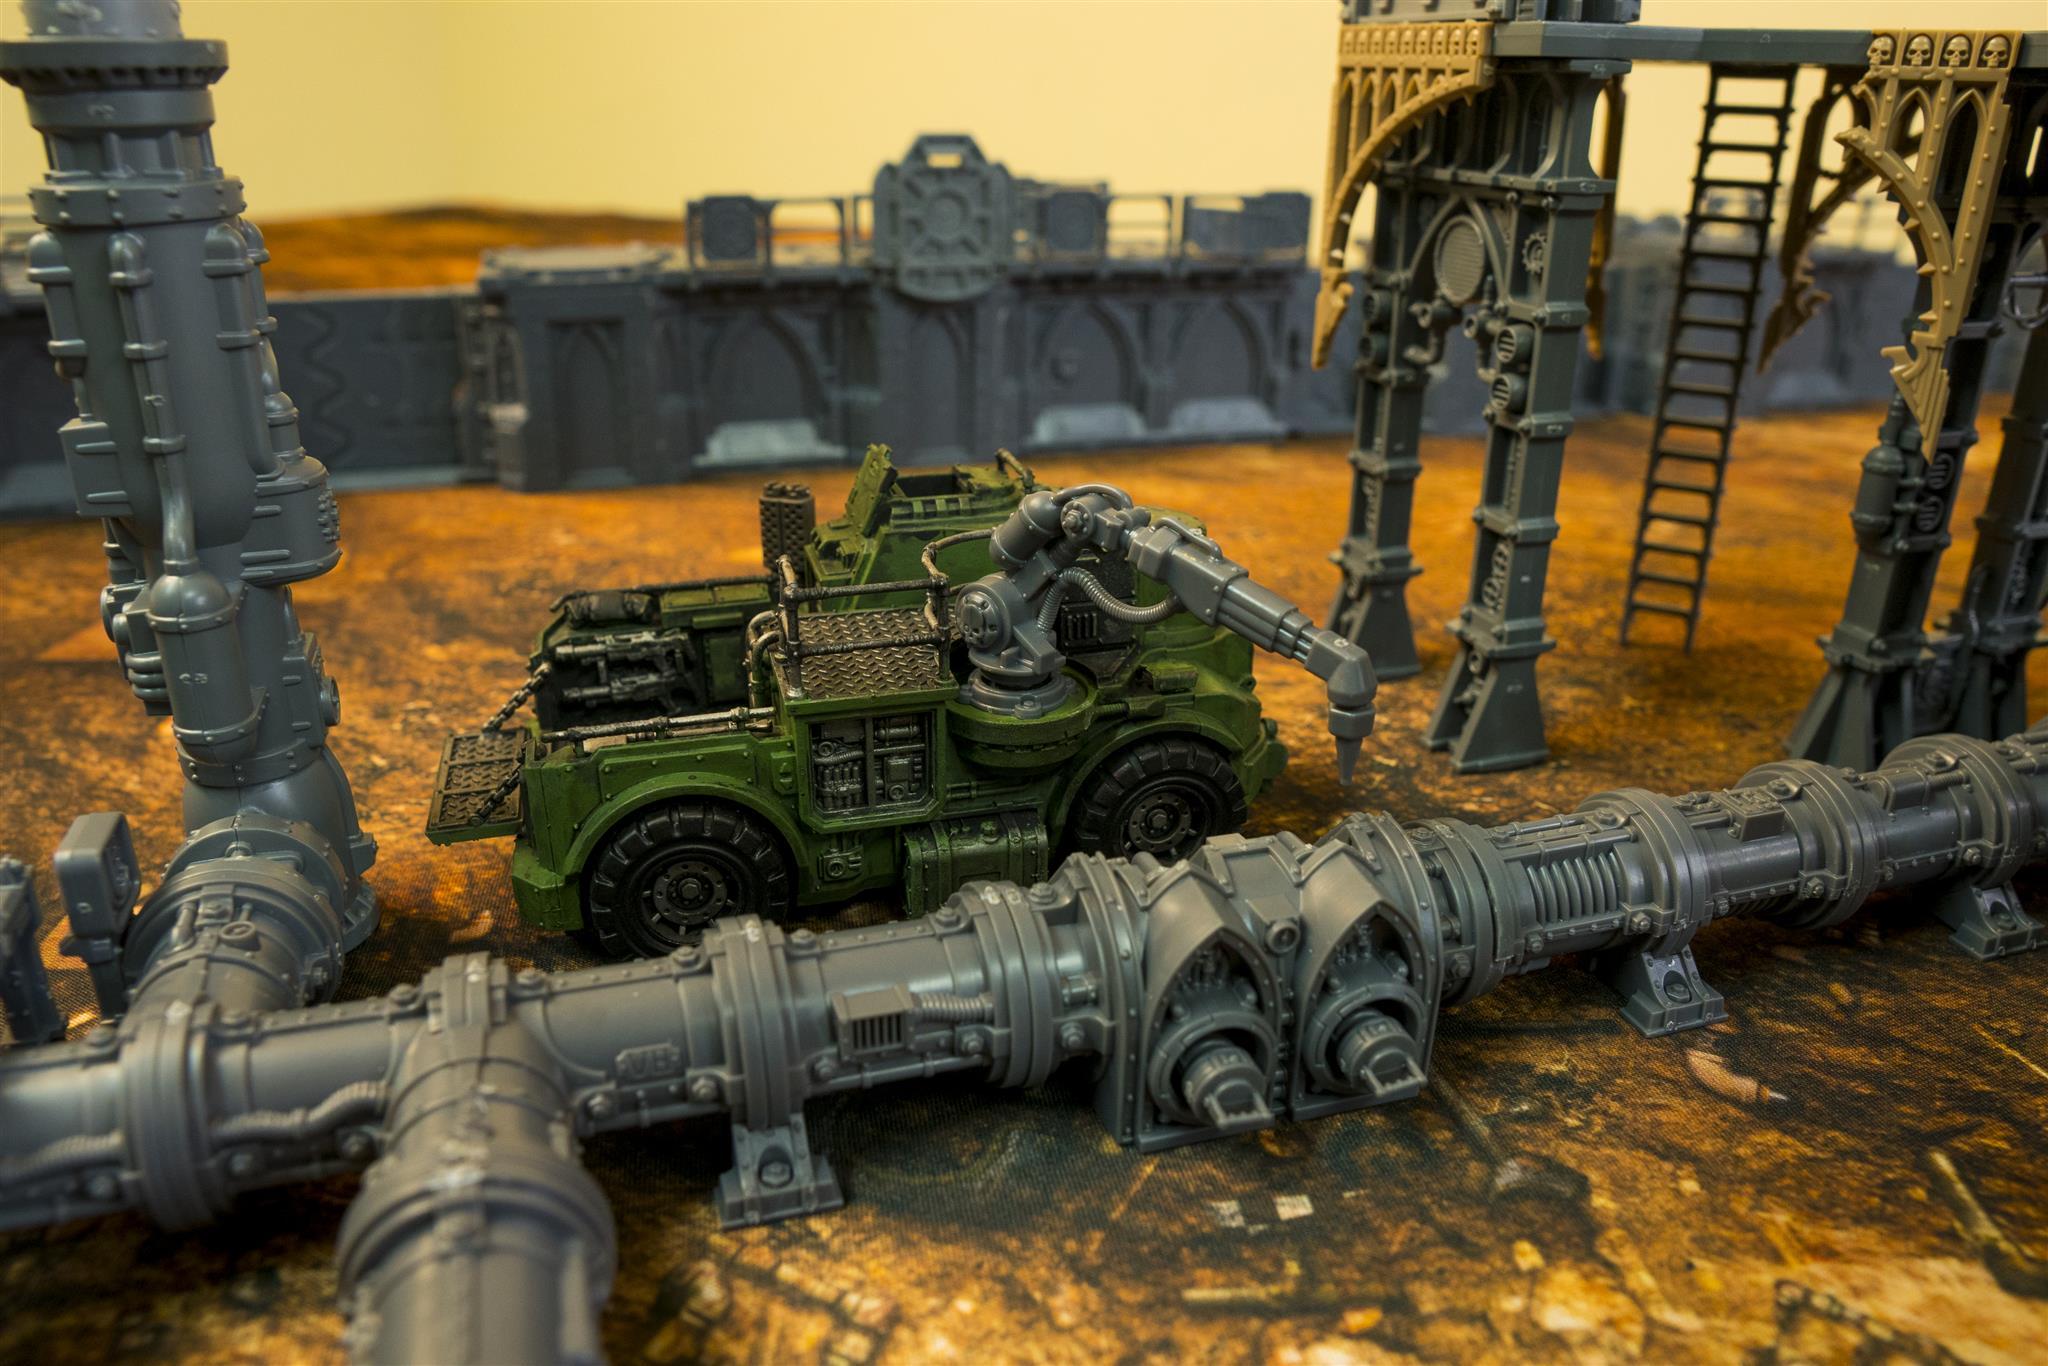 Warhammer 40k refinery terrain, 3D printed parts given the paint